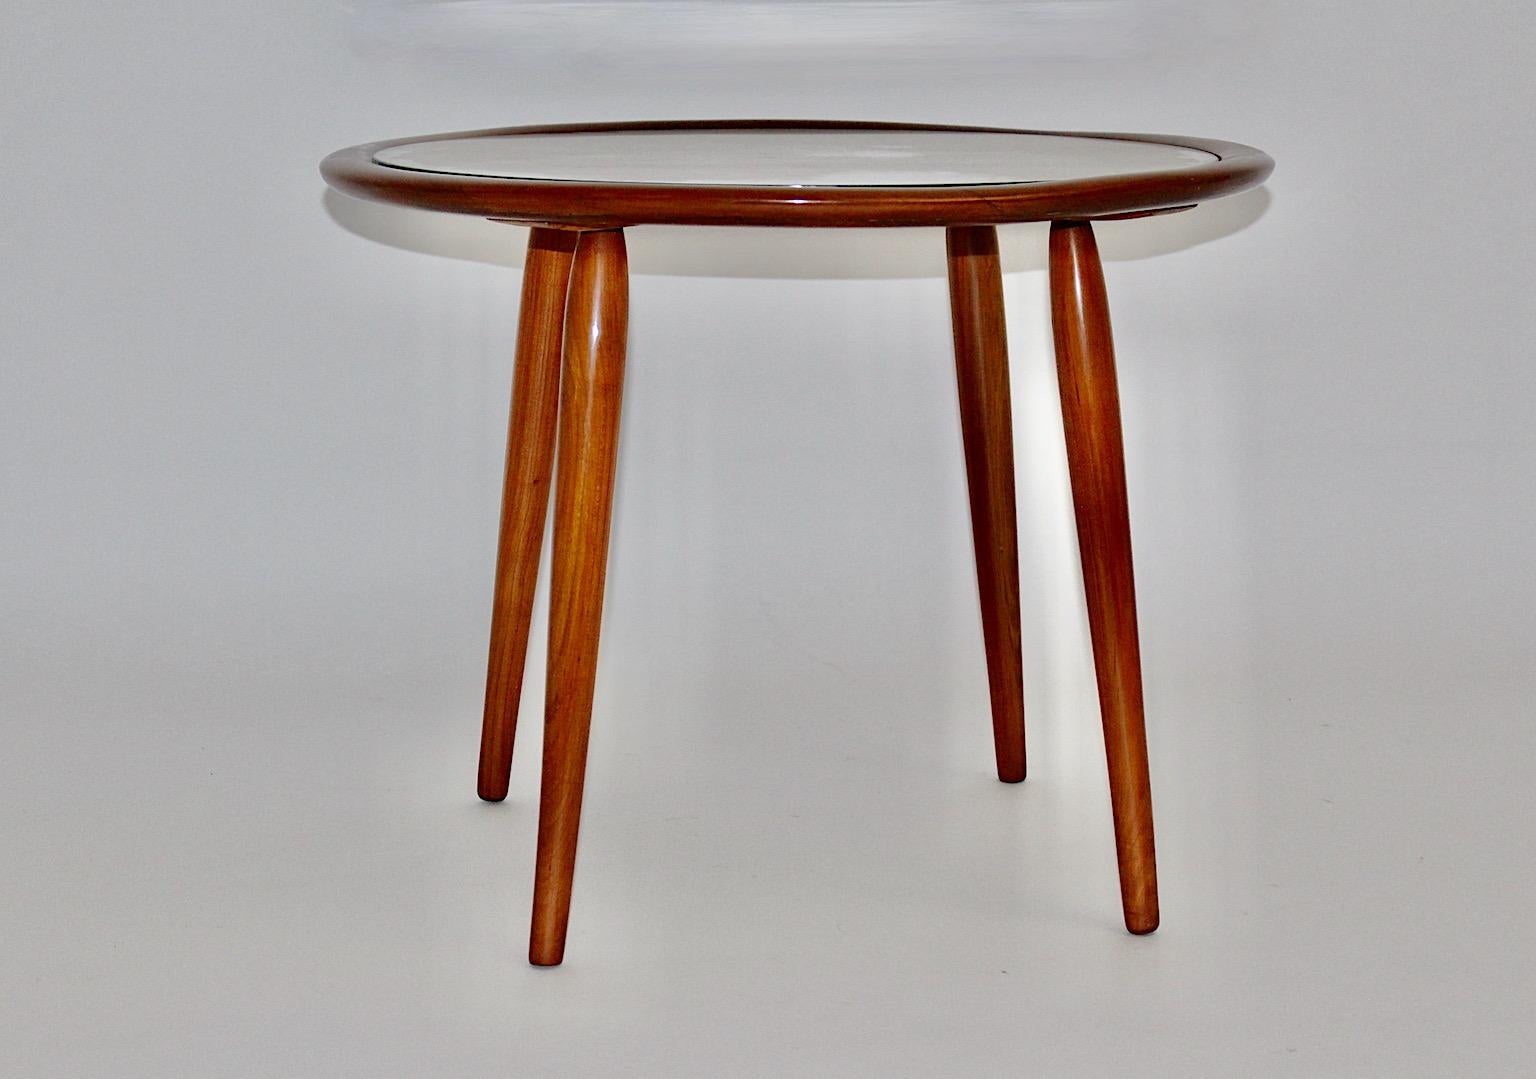 Mid-Century Modern vintage circular like coffee table or side table by Max Kment for Kunstgewerbliche Werkstätten Max Kment 1949/50, Austria.
Solid shellac polished by hand cherry wood frame in stunning warmth color tone, strutting from beech and